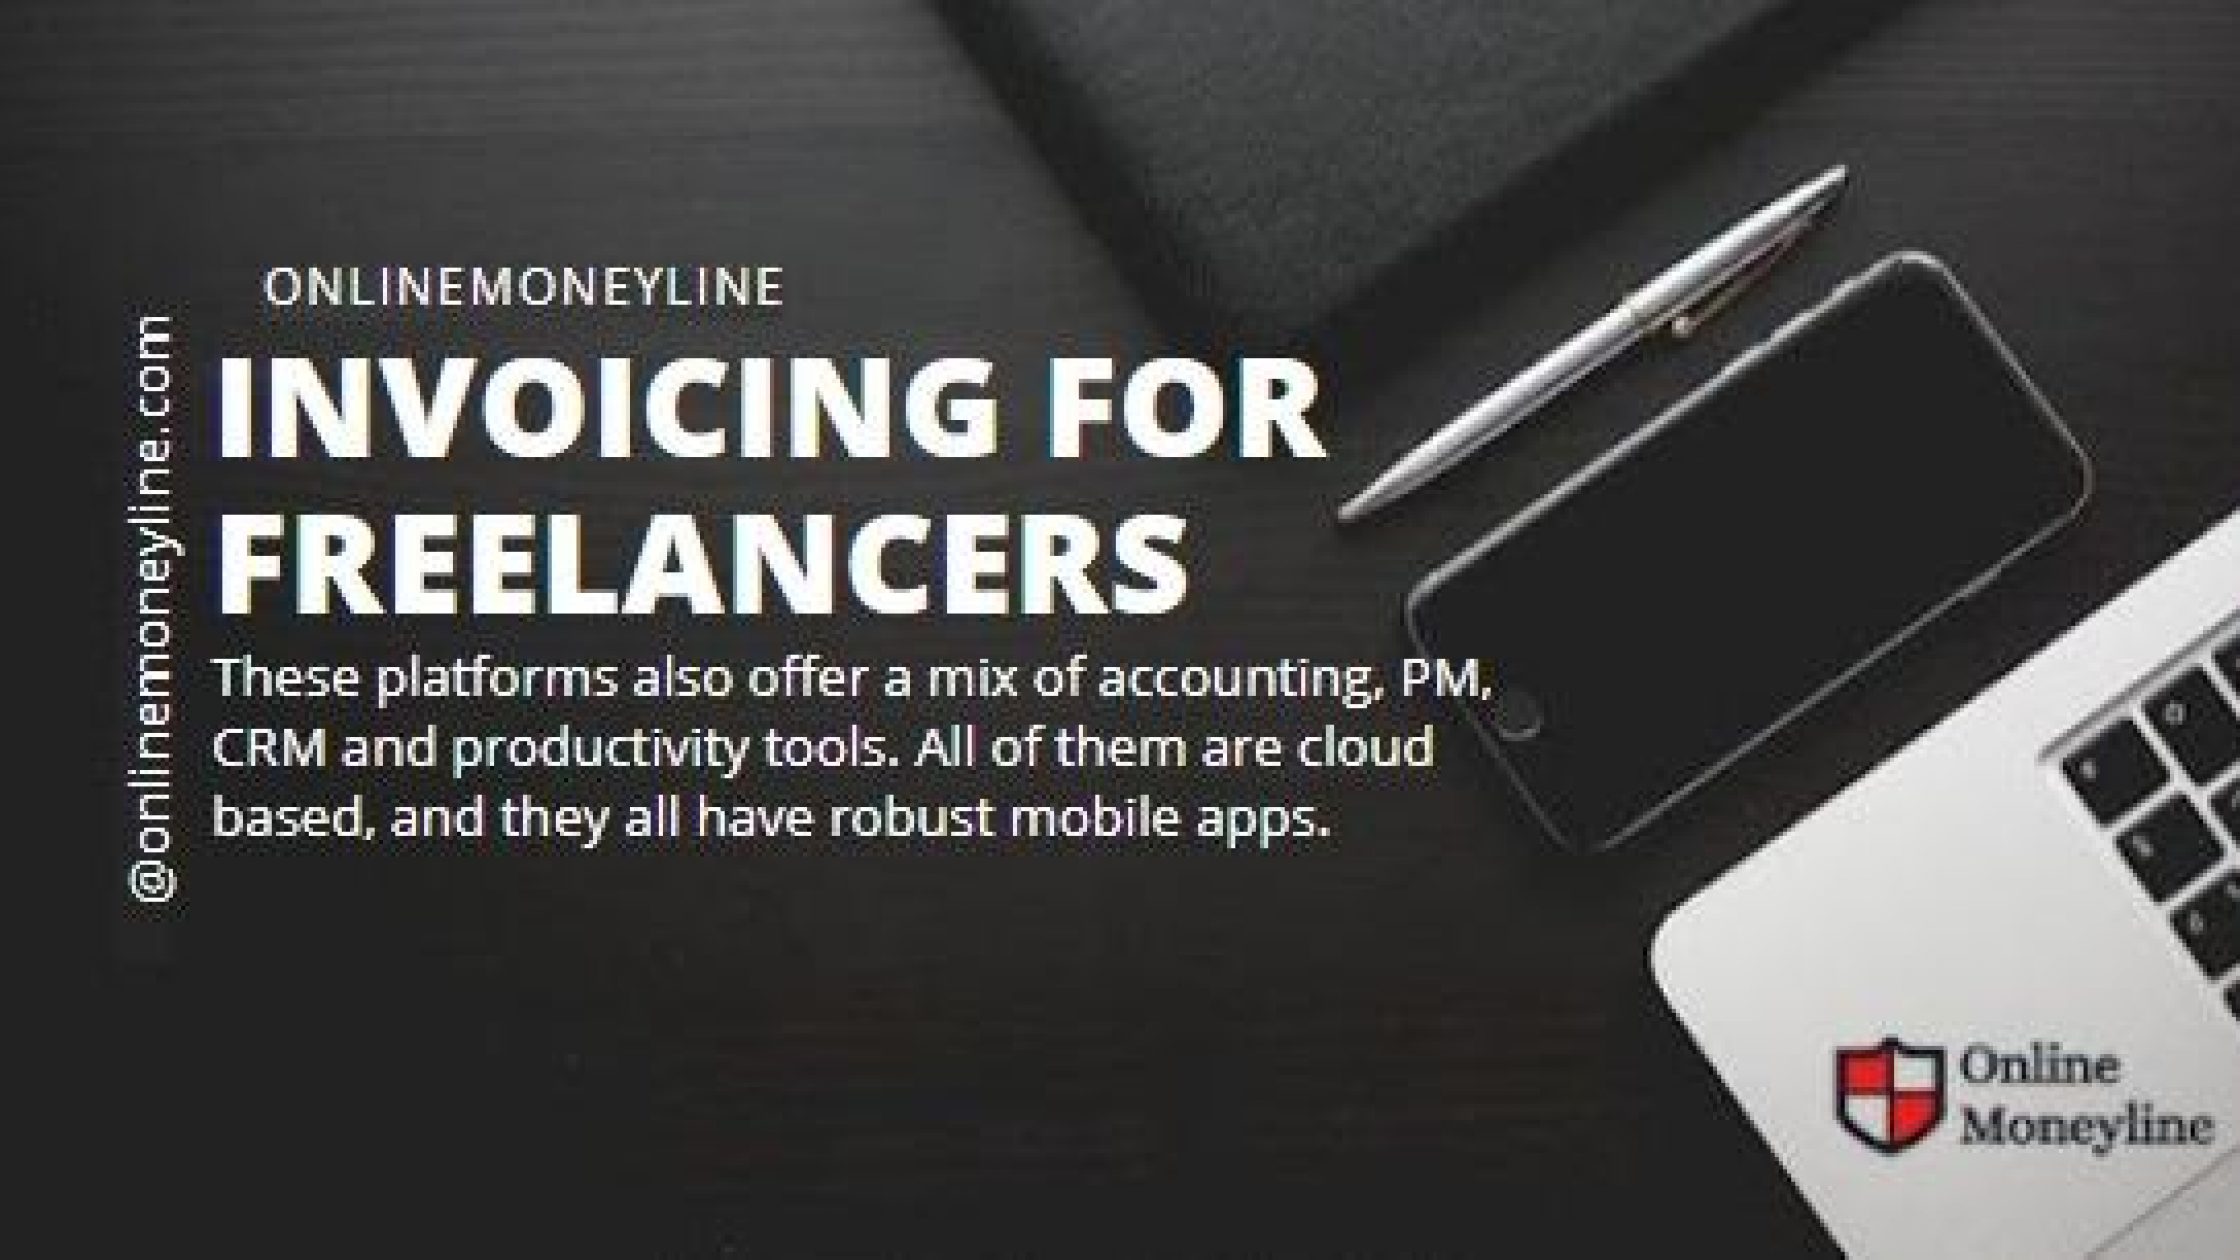 Invoicing For Freelancers